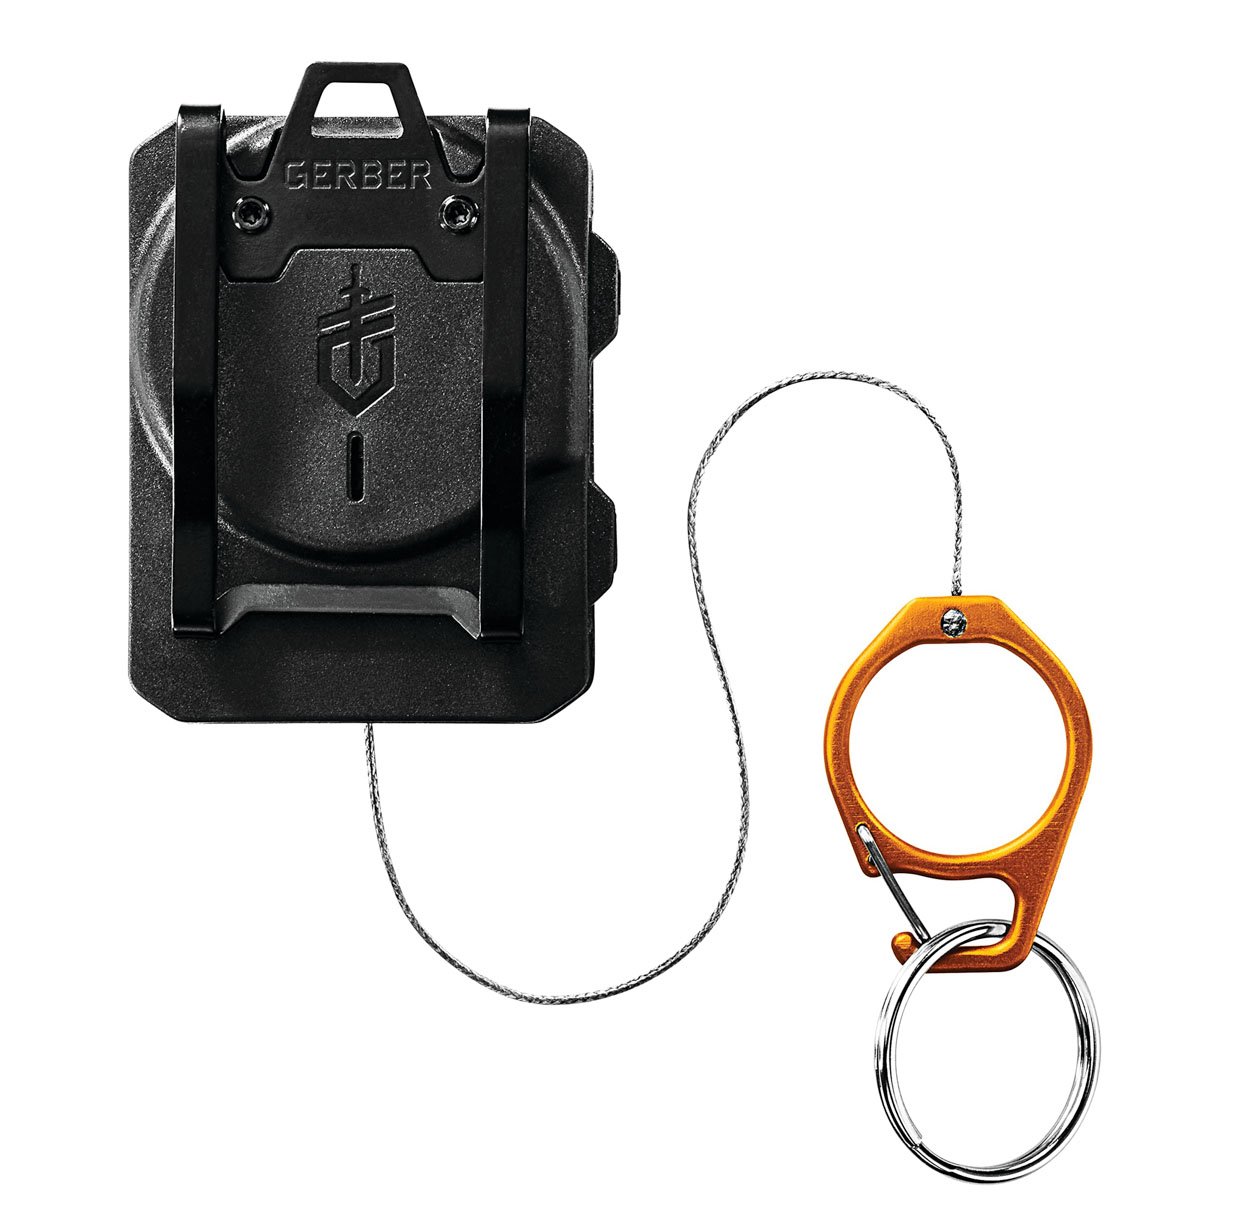 Gerber Gear Defender Fishing Tether Keeps Tools From Getting Away